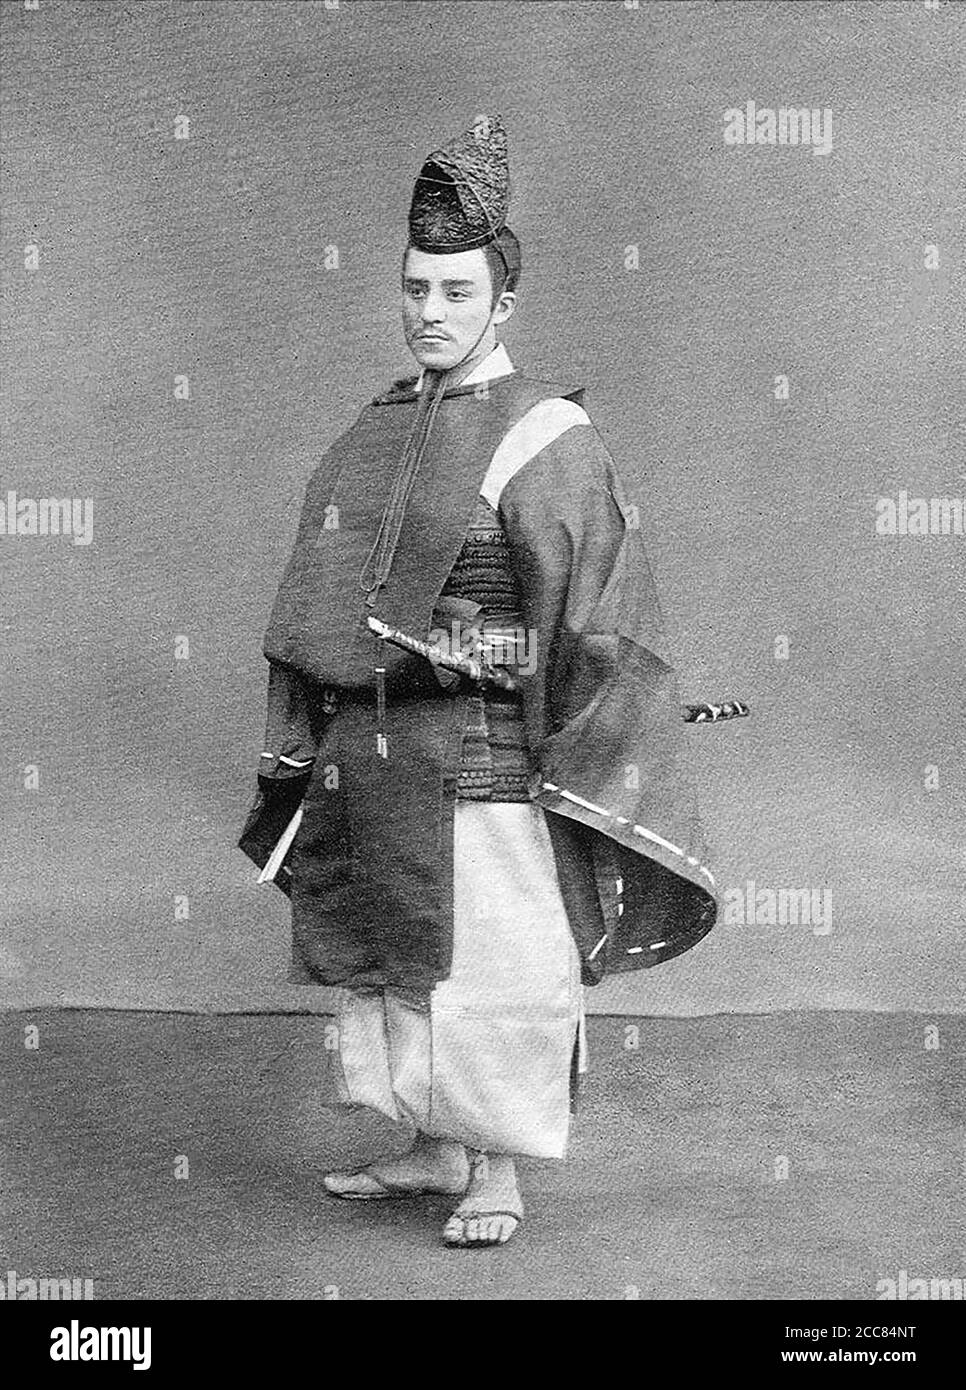 Japan: 'One of the Bodyguard'. Chemigraph from series 'Military Costumes in Old Japan' by Kazumasa Ogawa (1860-1929), 1893, Tokyo. Ogawa Kazumasa, also known as Ogawa Kazuma or Ogawa Isshin, was a Japanese photographer, chemigrapher, printer and publisher of the Meiji era. He was a pioneer in photomechanical printing and photography, and was born into the Matsudaira samurai clan, where he studied English and photography at the age of 15. Stock Photo